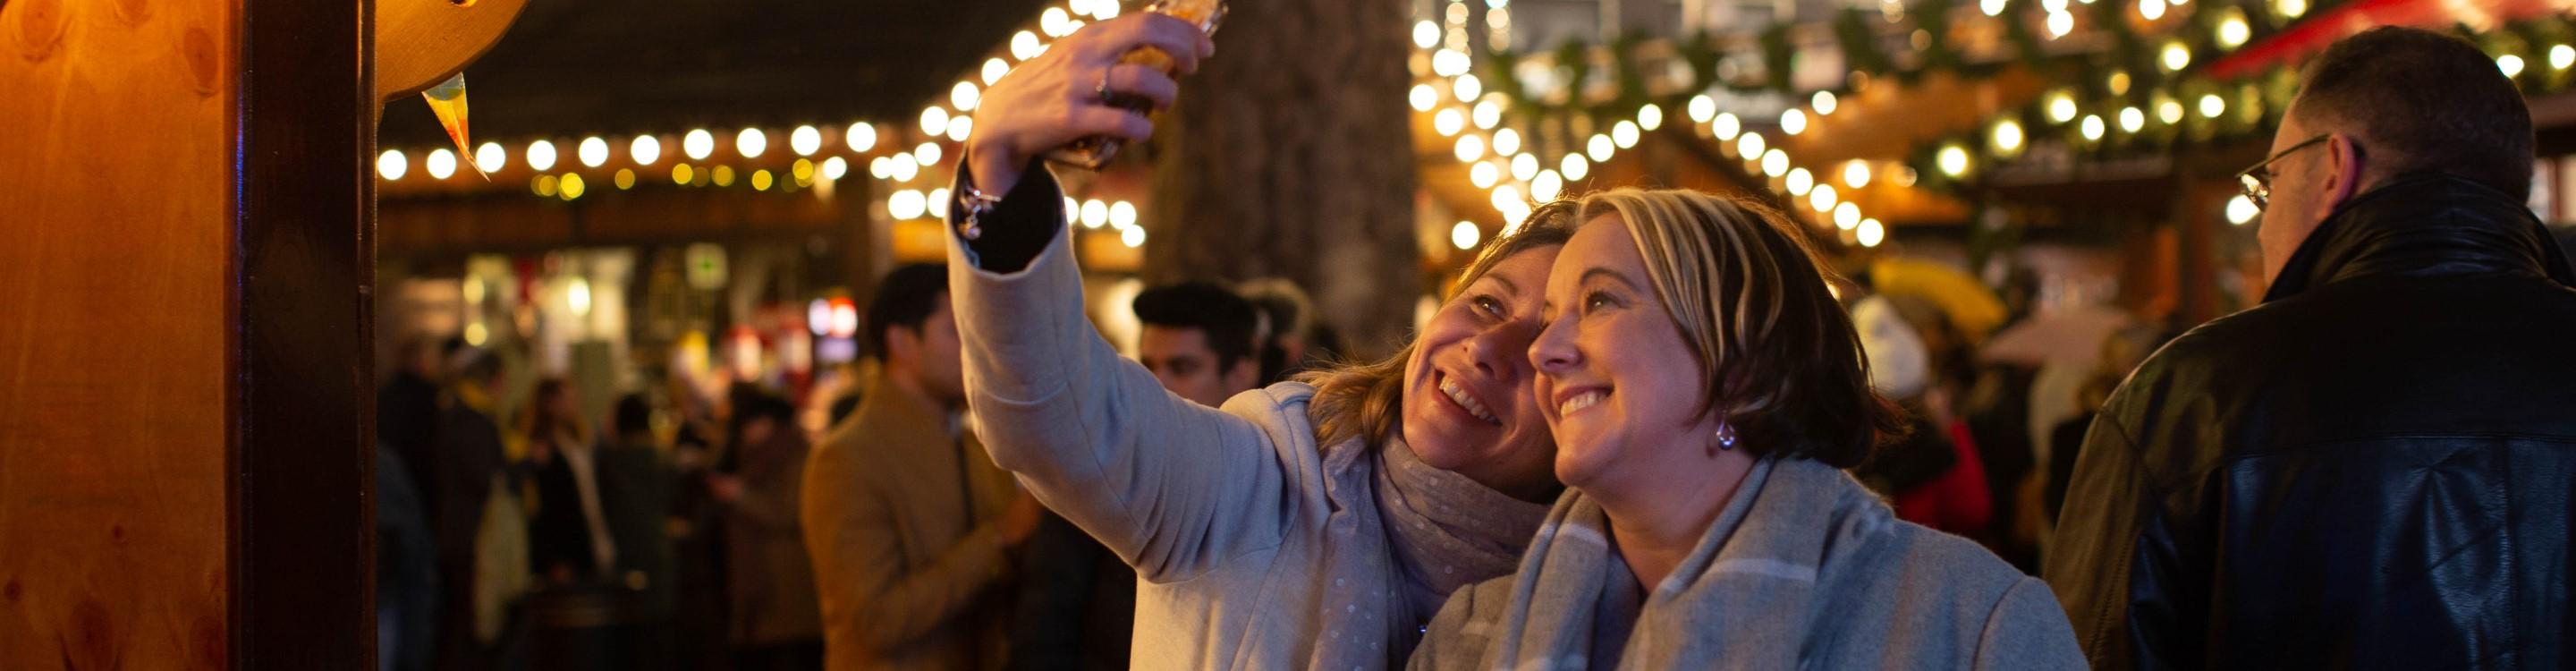 Two people smiling as they take a selfie at a Christmas market